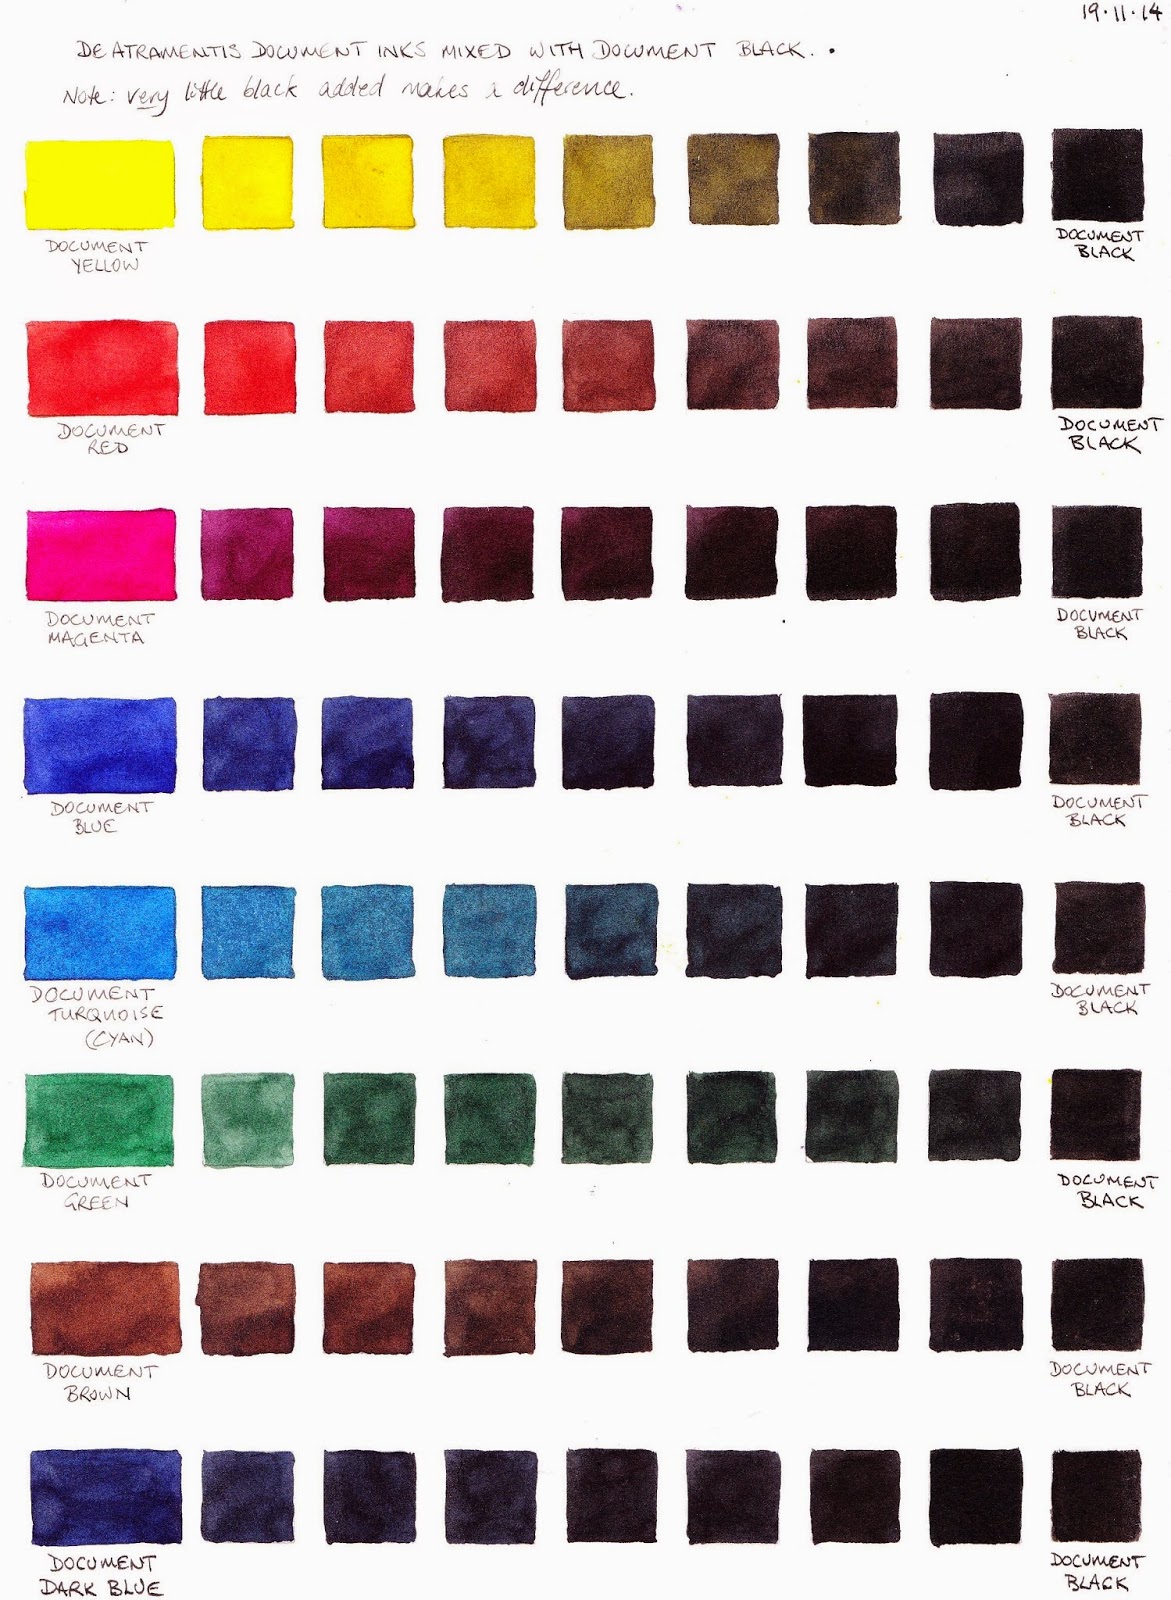 Blundell Atramentis Document Inks mixed with Black Updated January 2015